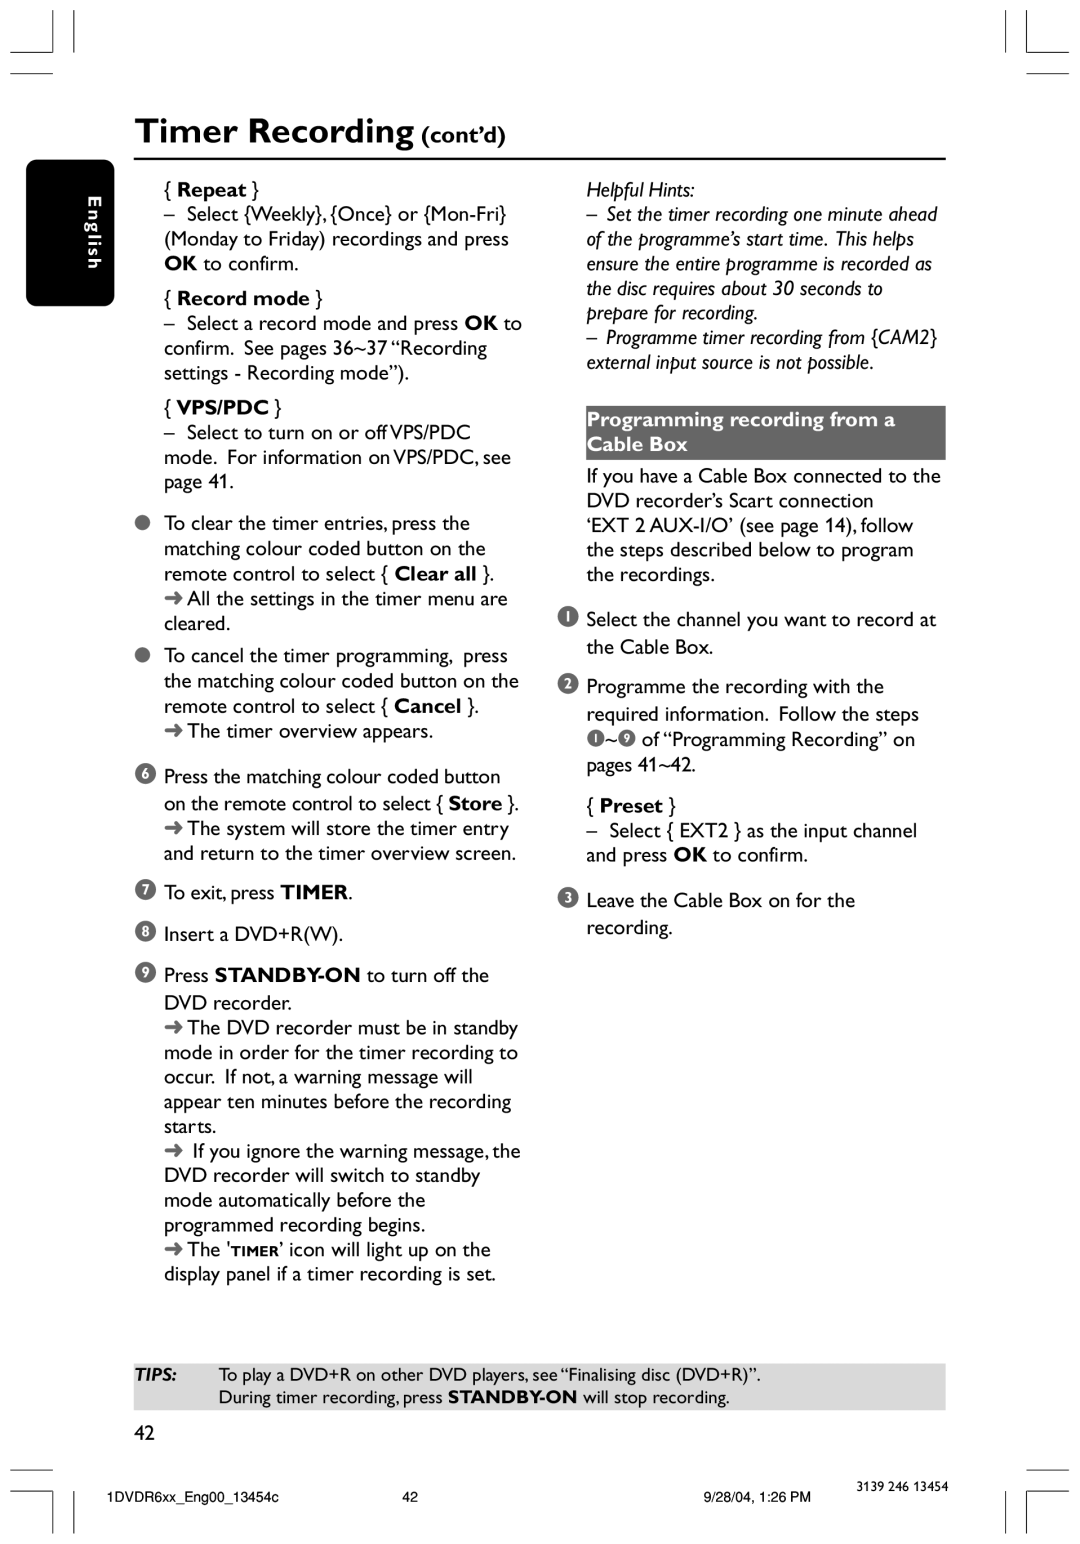 Philips DVDR612/97 user manual Timer Recording cont’d, Repeat, Record mode, Vps/Pdc, Helpful Hints, Preset 